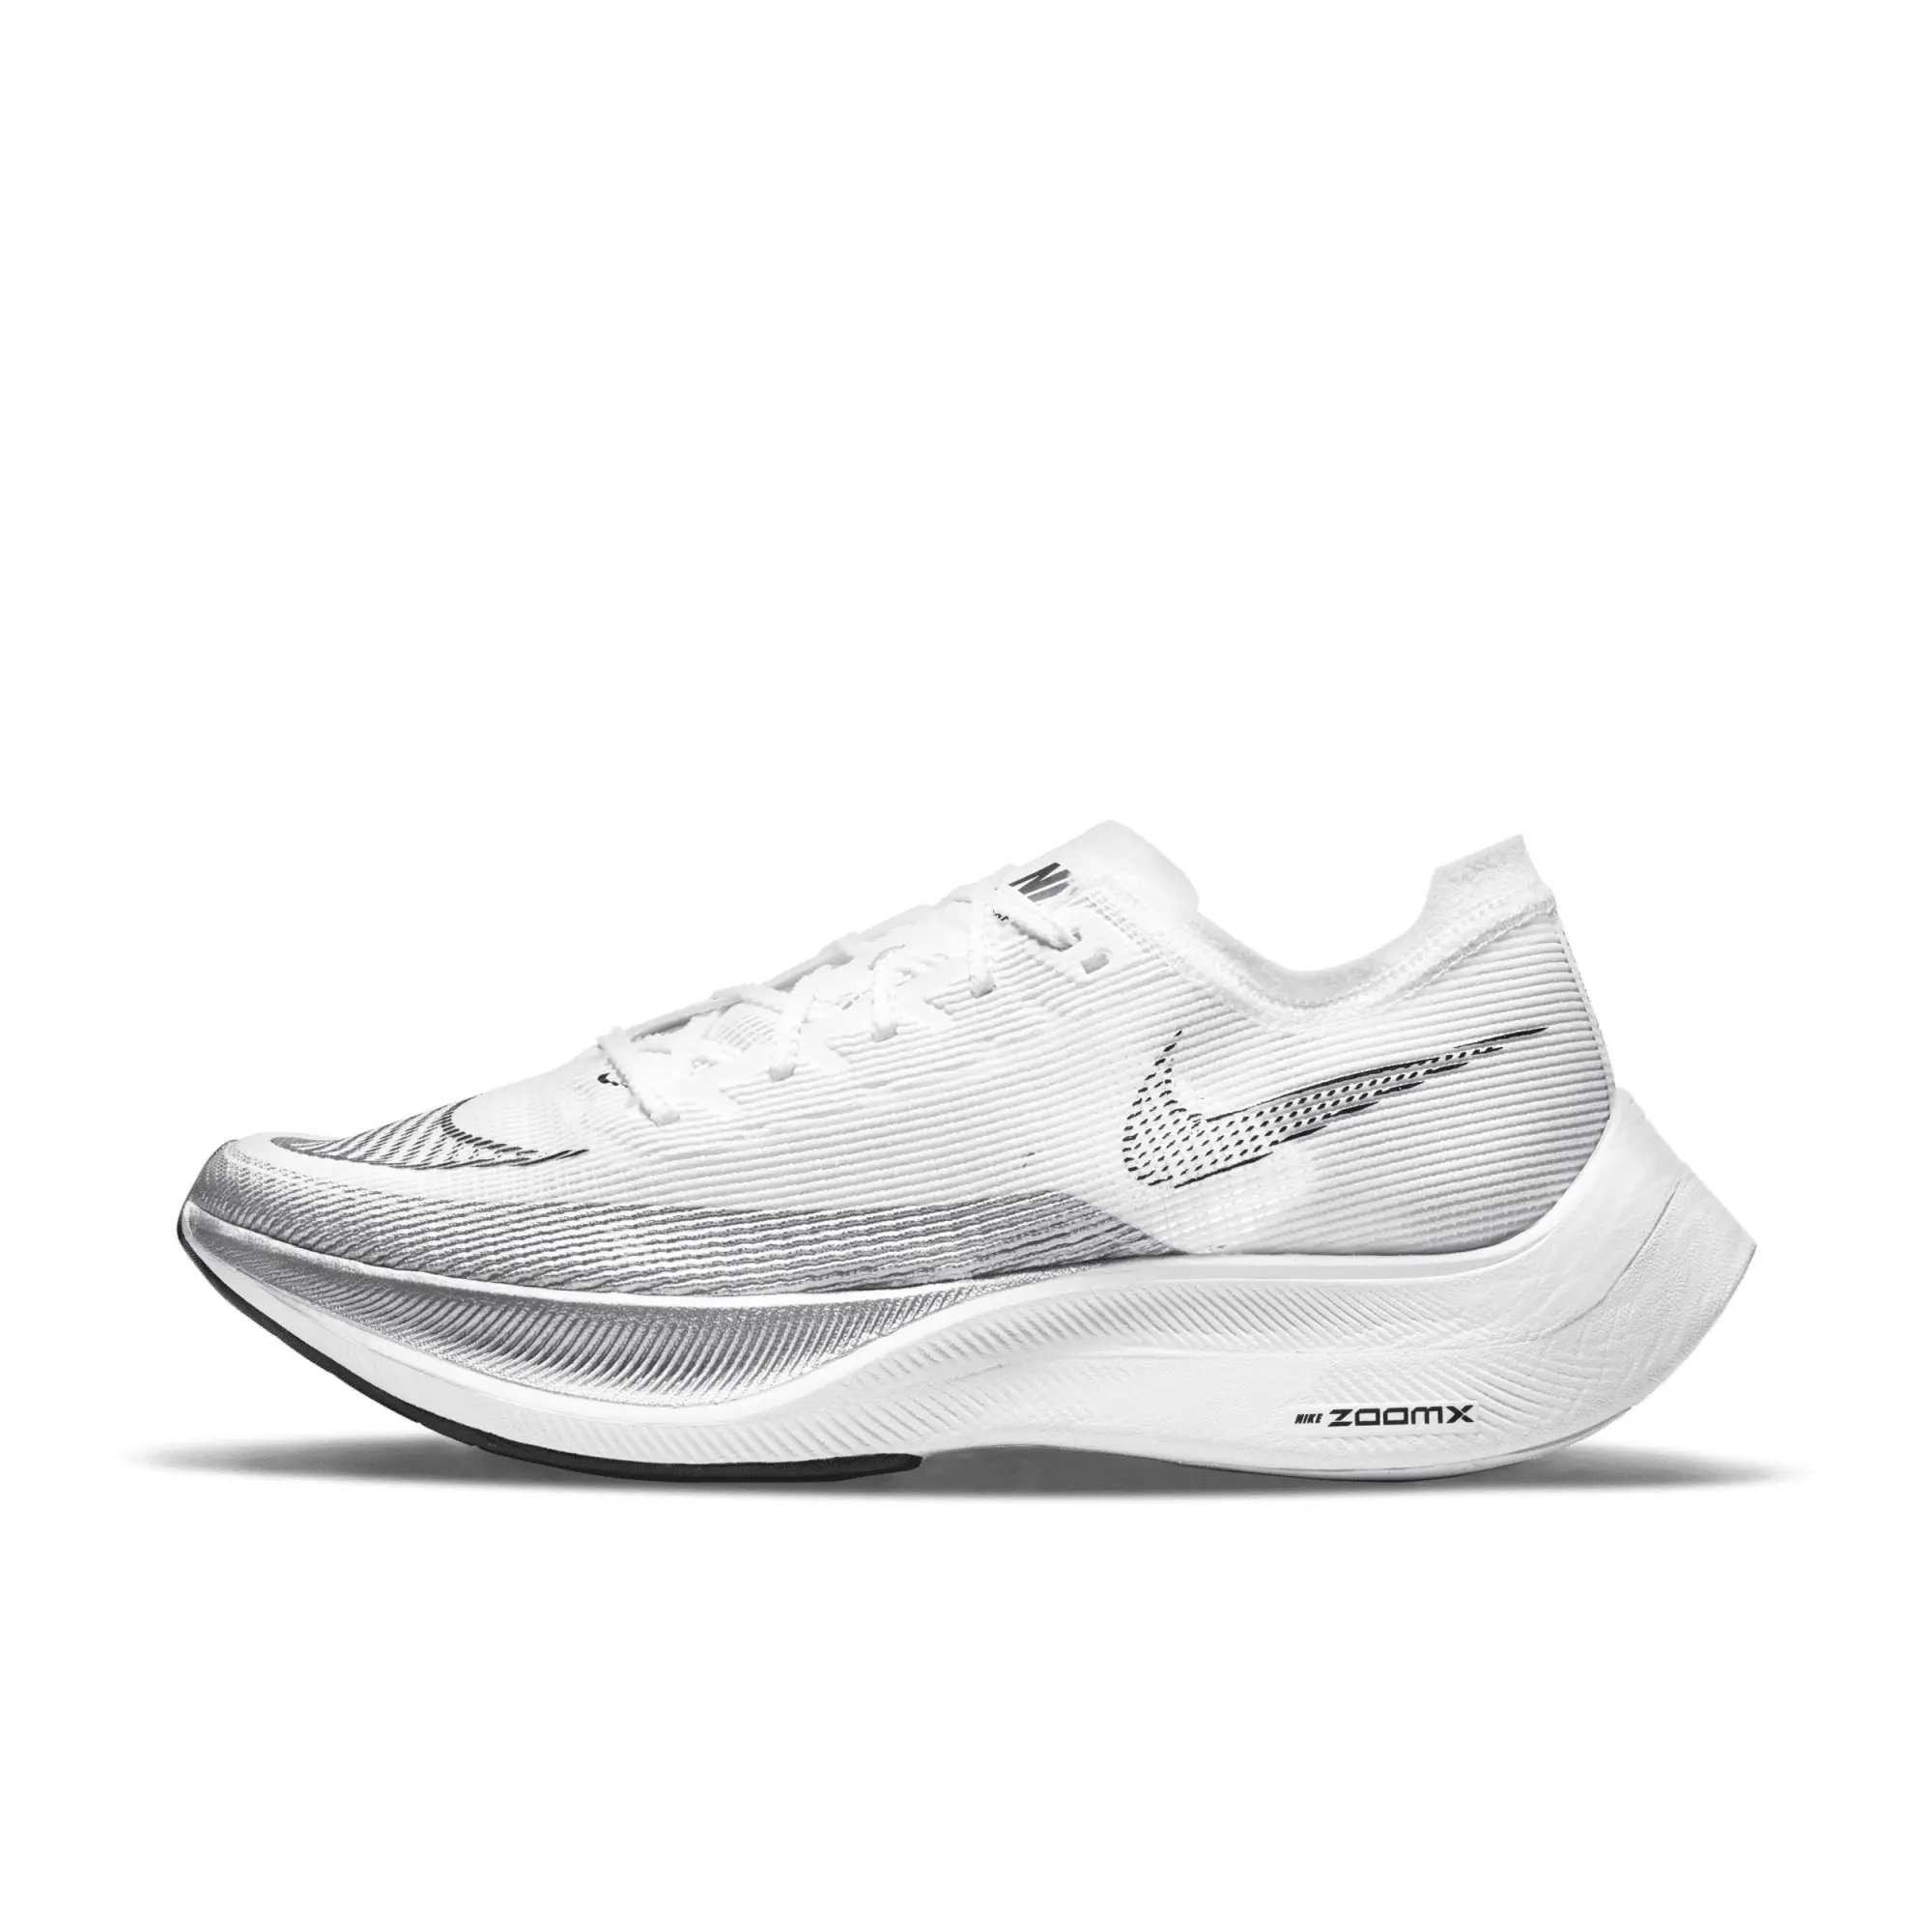 Nike ZoomX Vaporfly Next % 2 Shoes